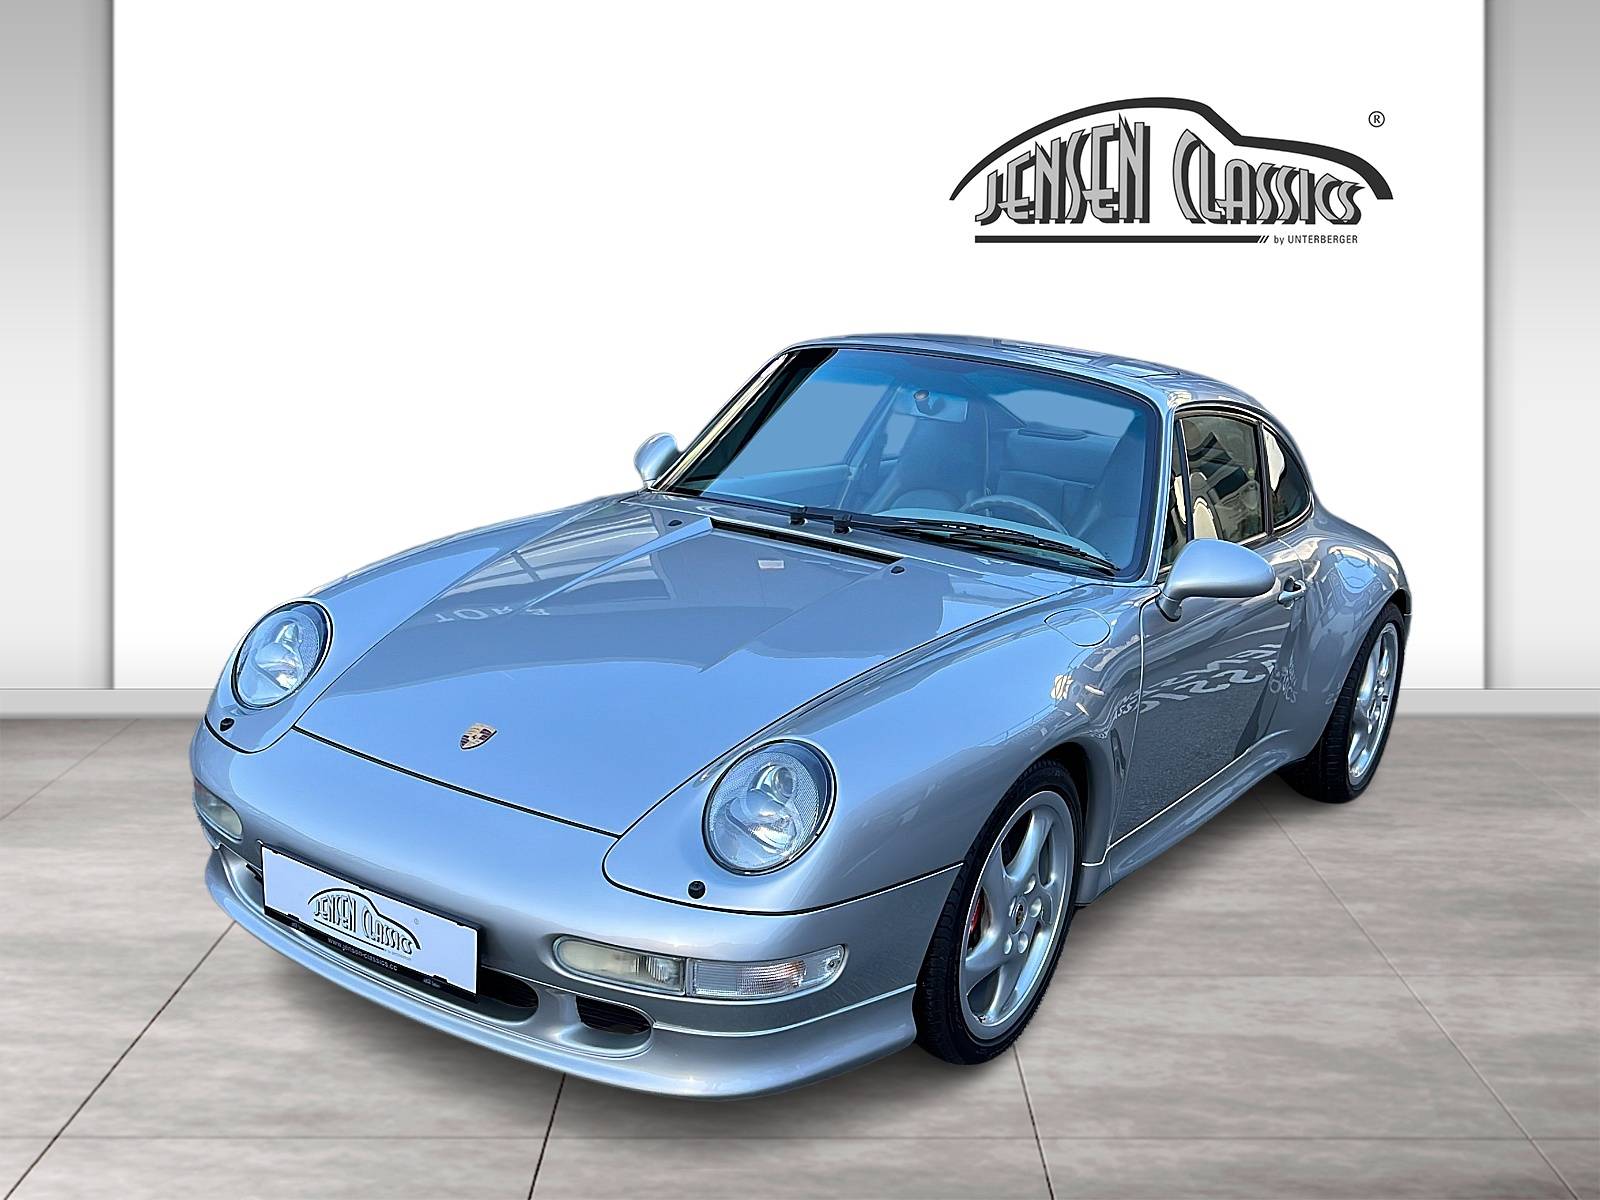 For Sale: Porsche 911 Carrera 4S (1997) offered for GBP 108,406